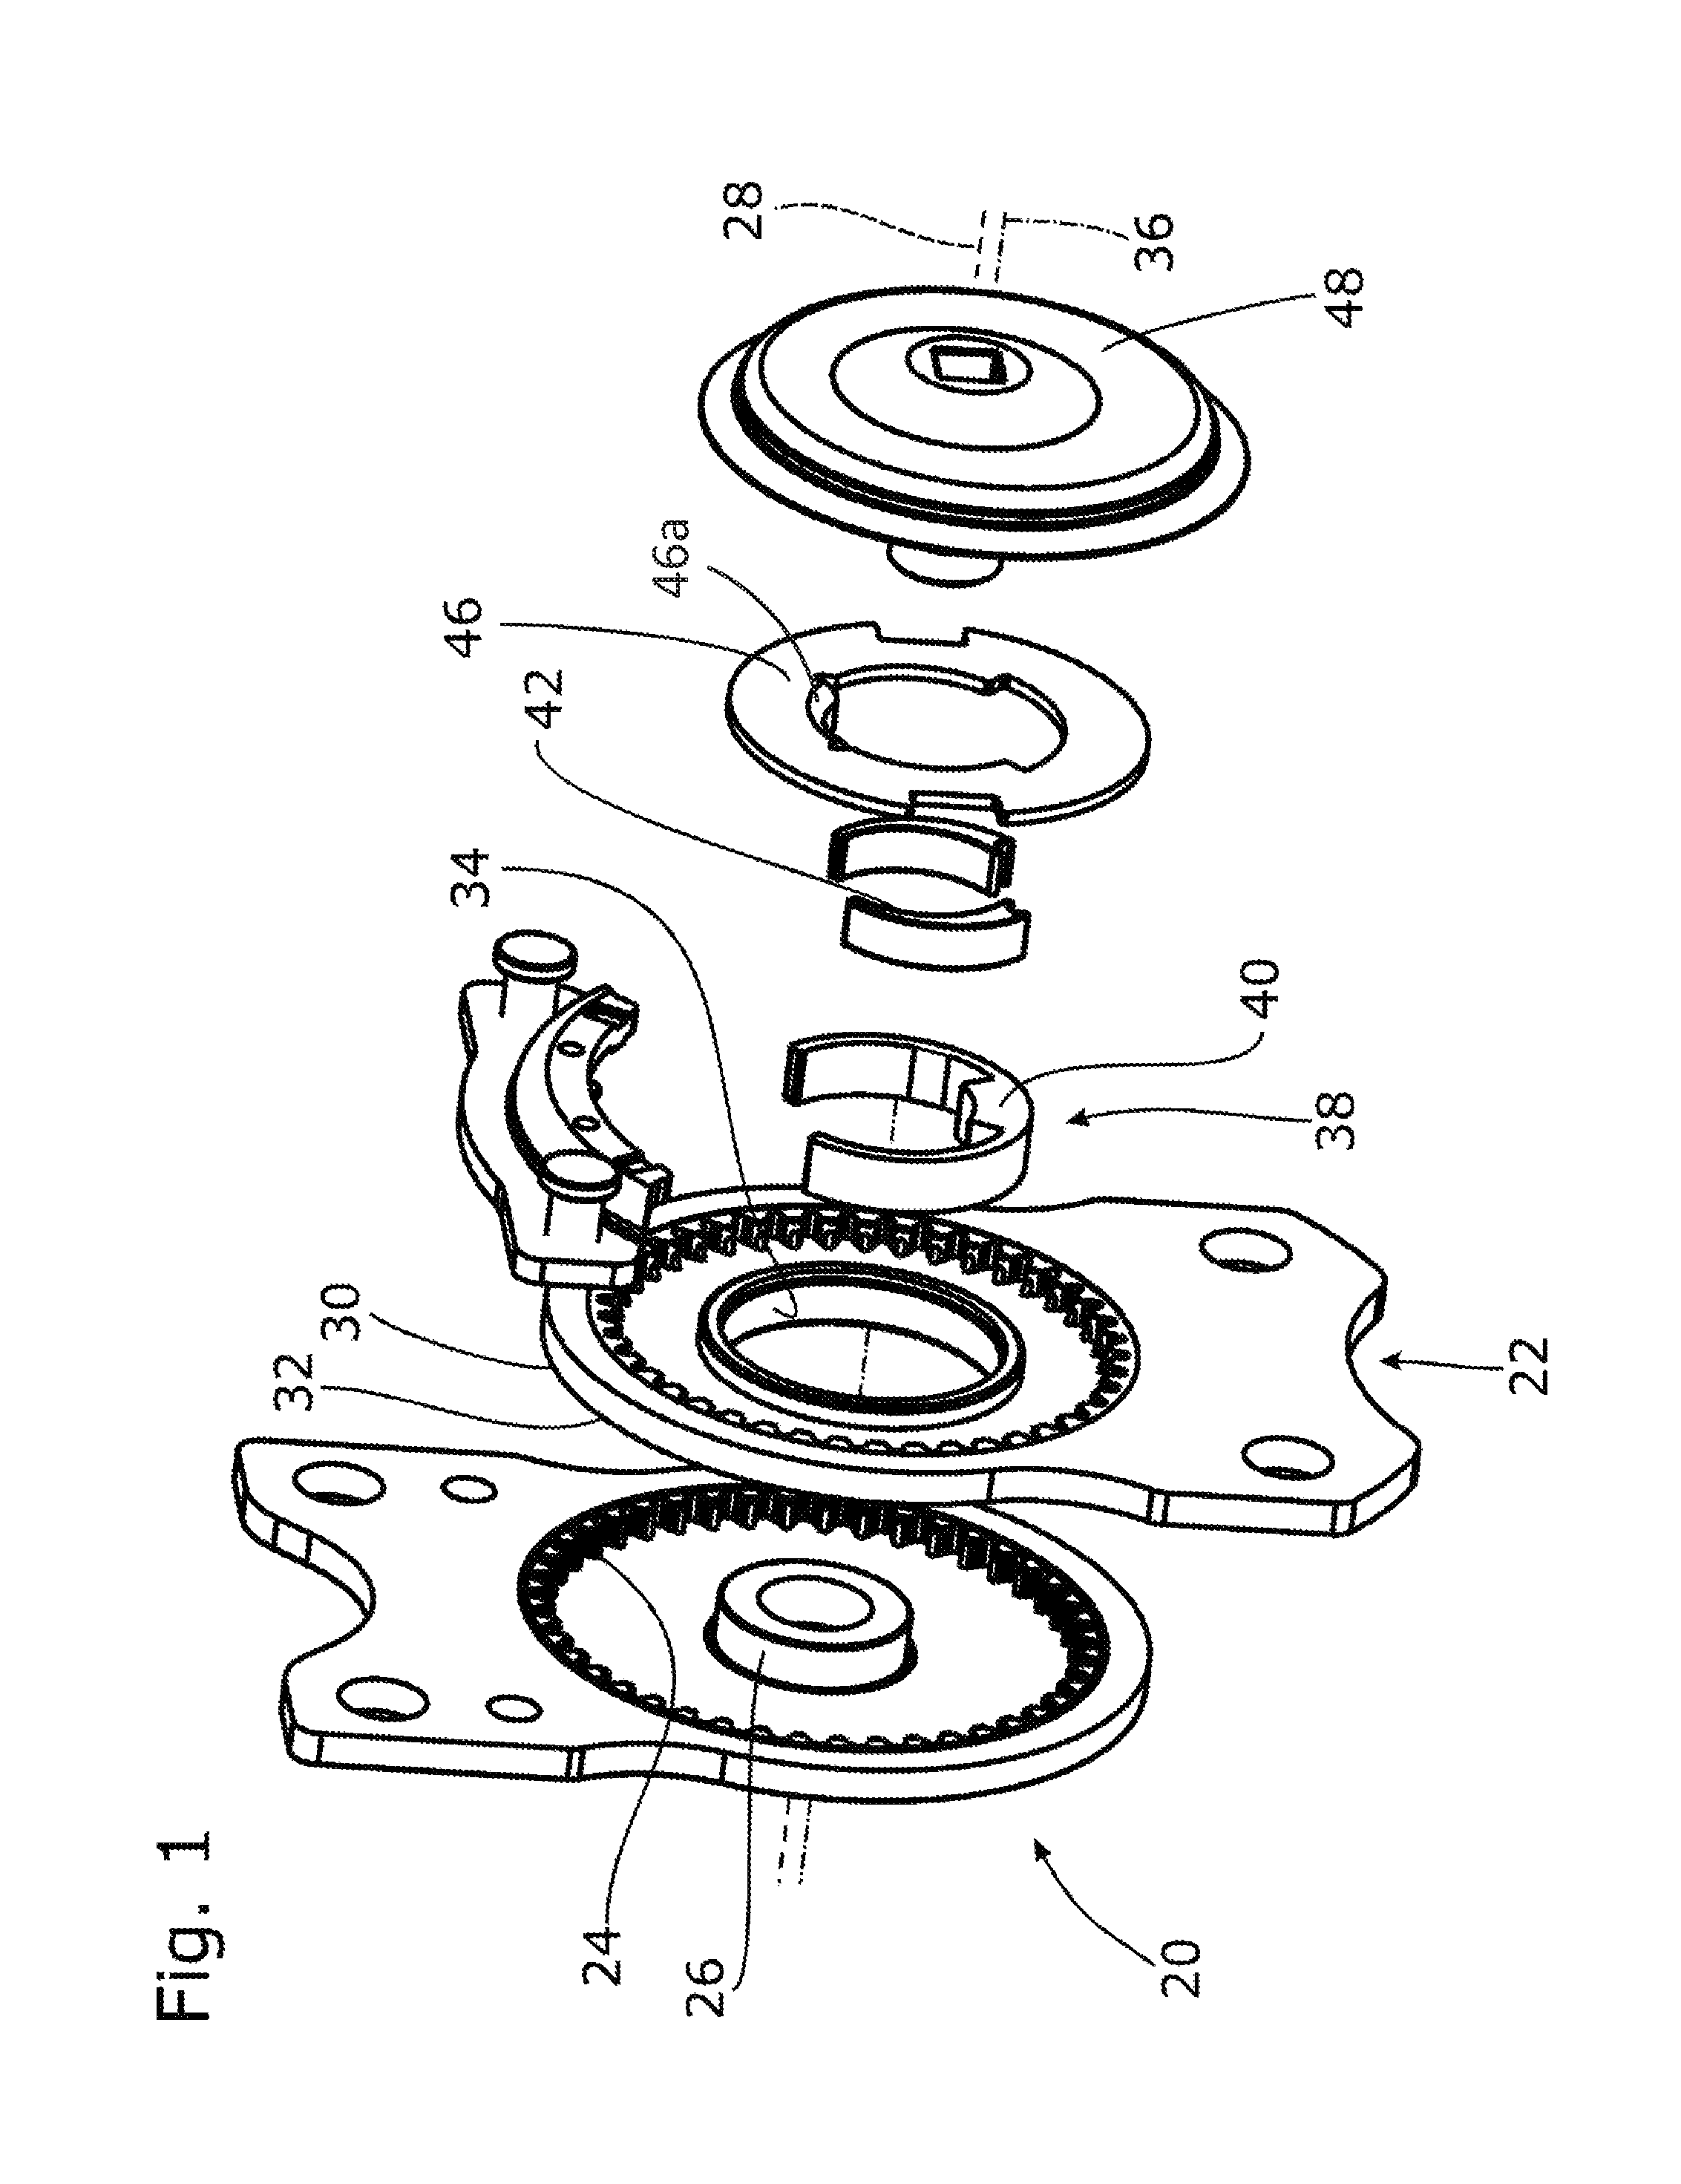 Eccentric joint fitting for a vehicle seat